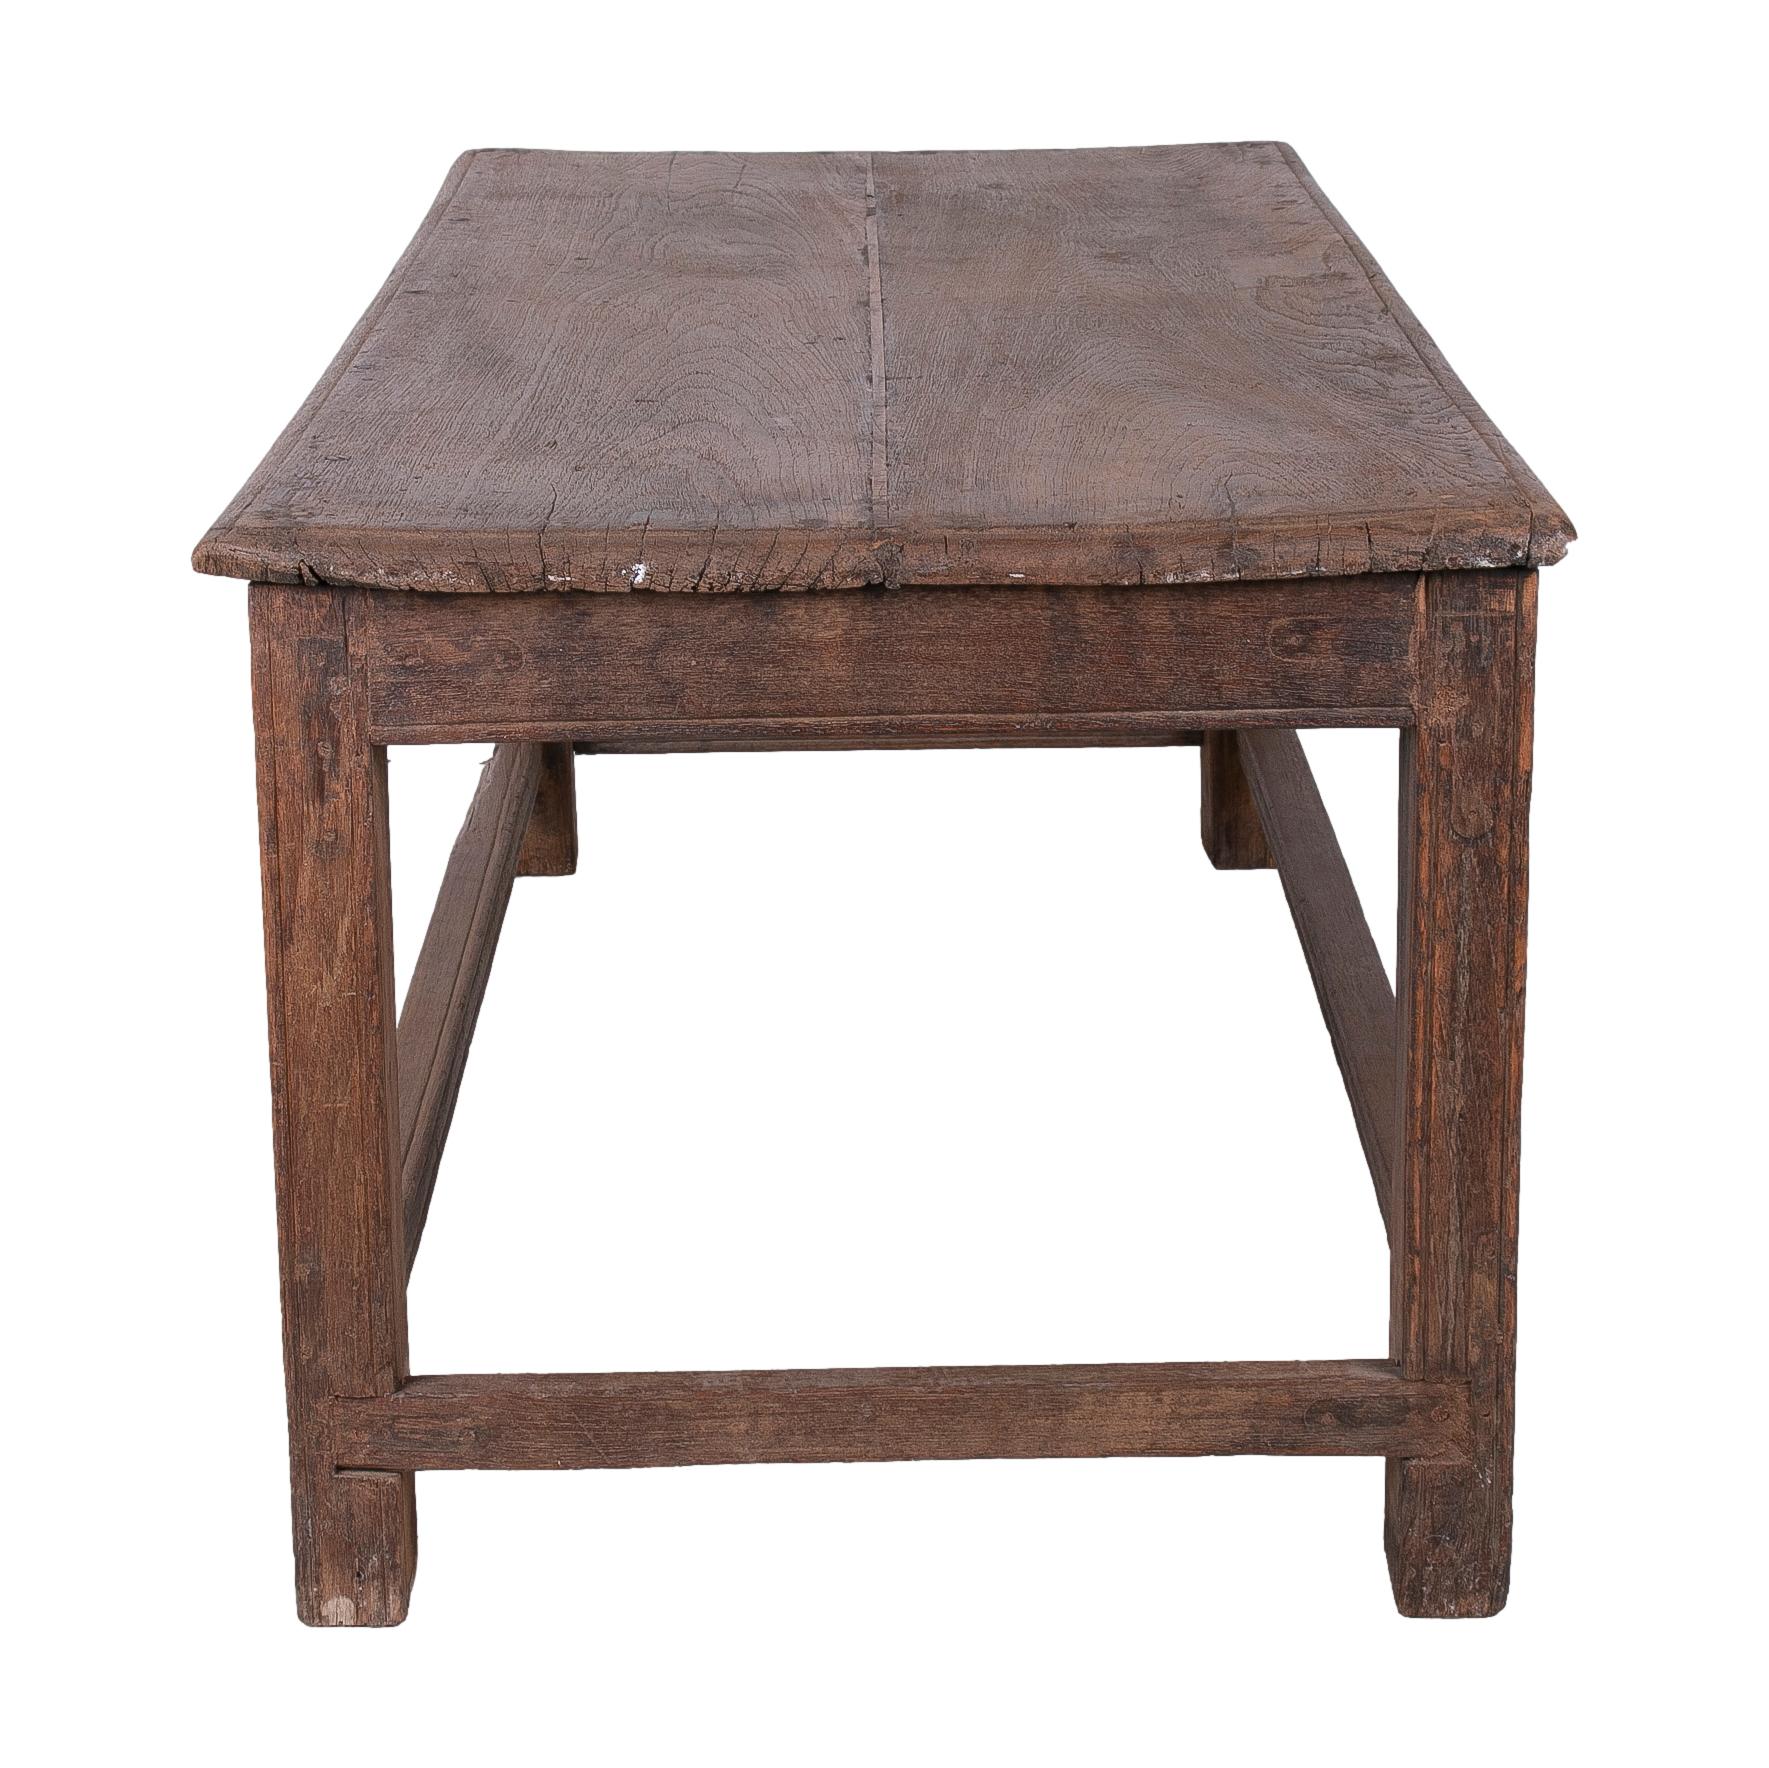 1970s Spanish Industrial Washed Wood Table w/ Crossbeam Legs In Good Condition For Sale In Marbella, ES